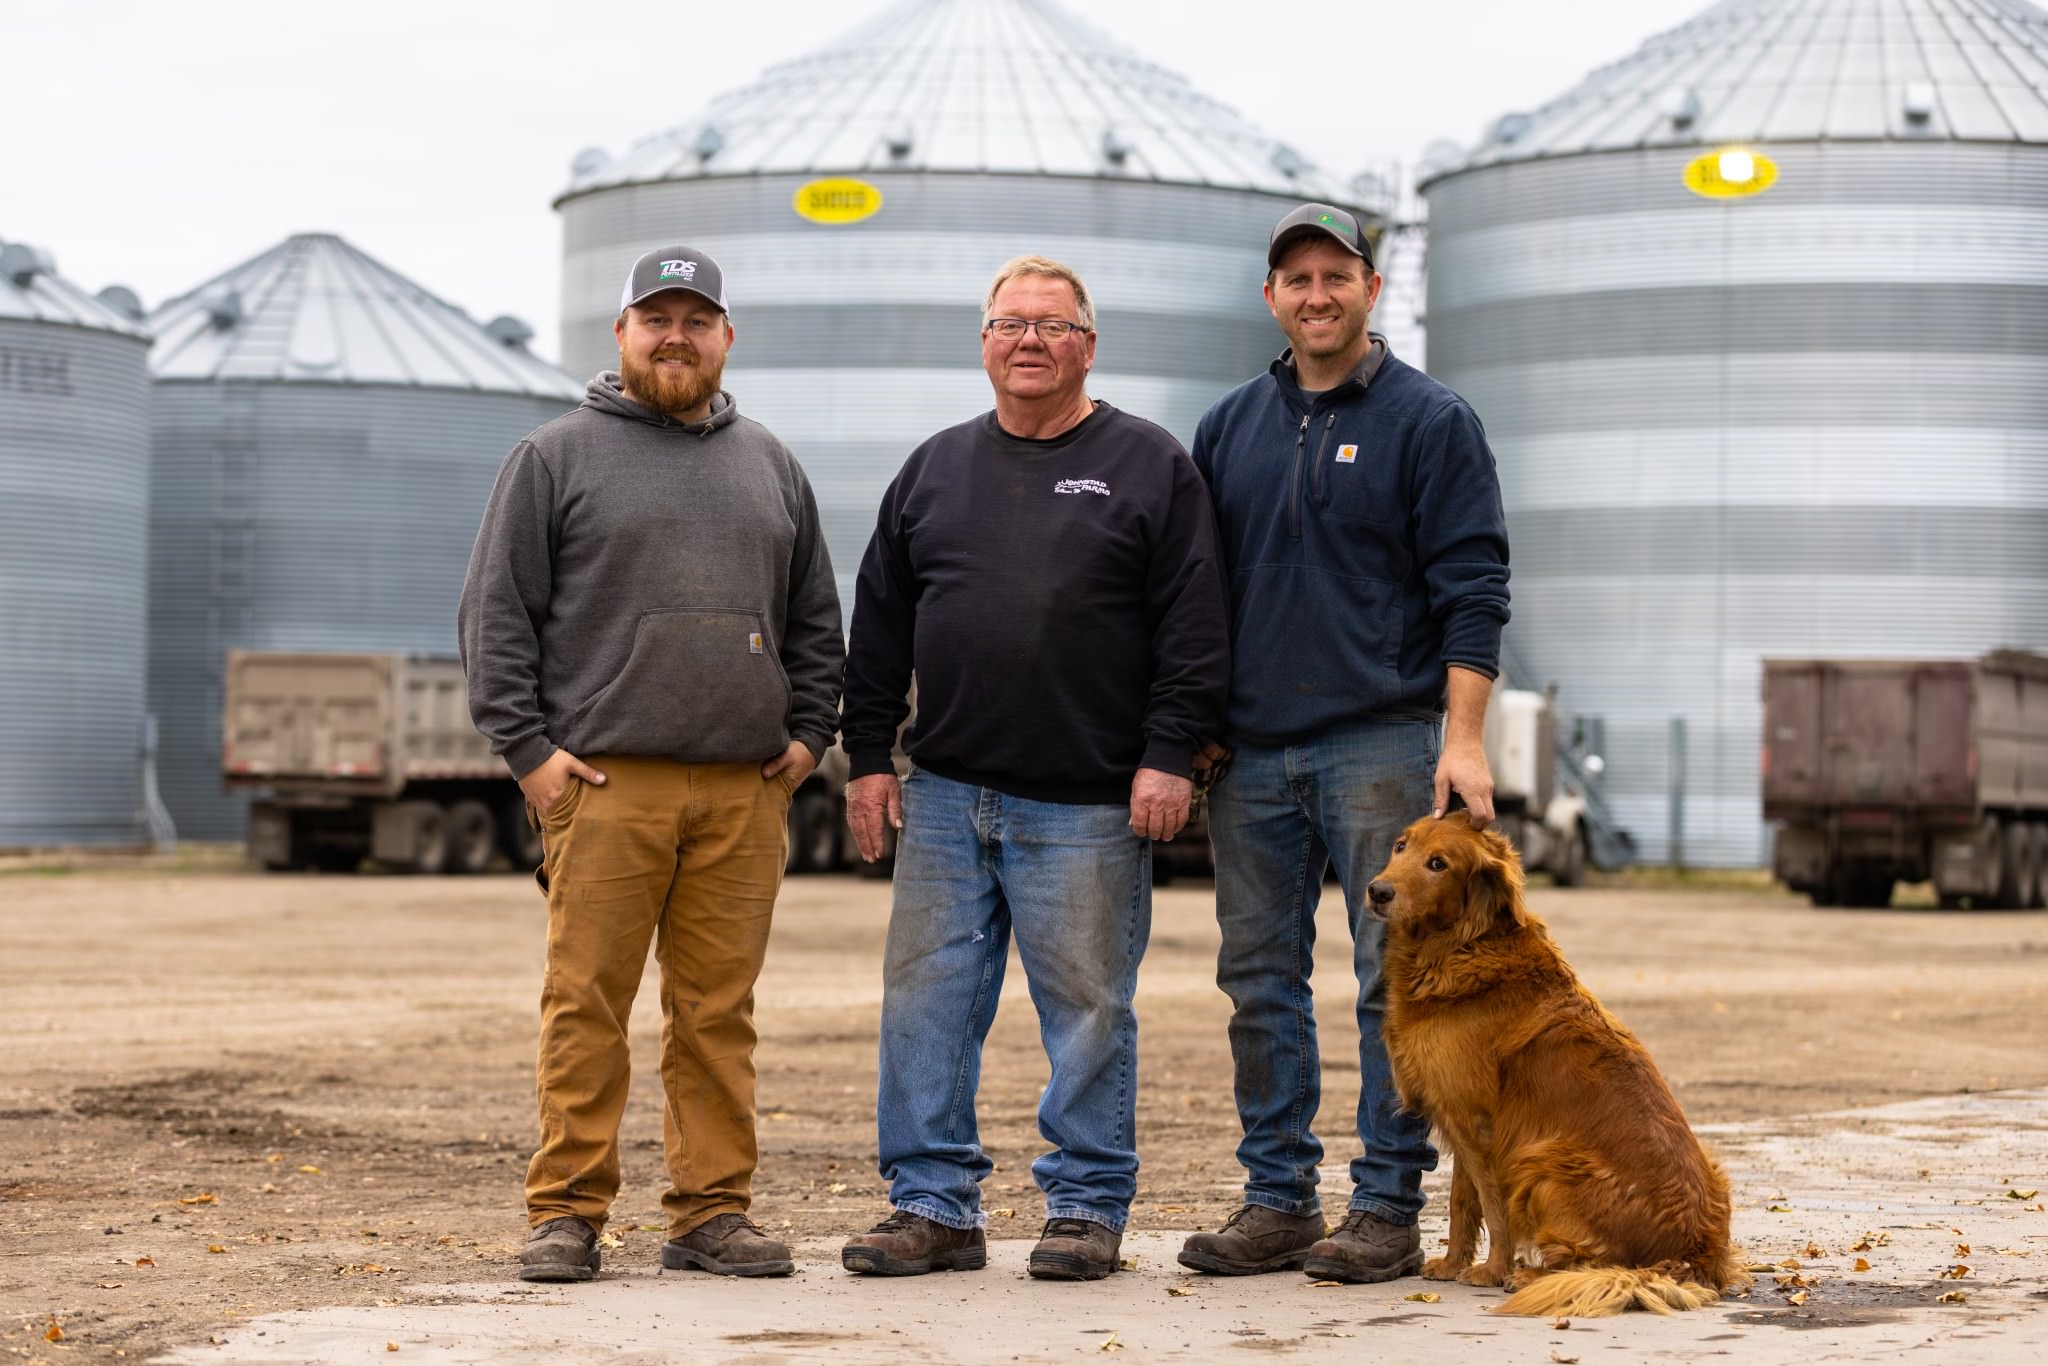 Three people and a dog standing in front of silos